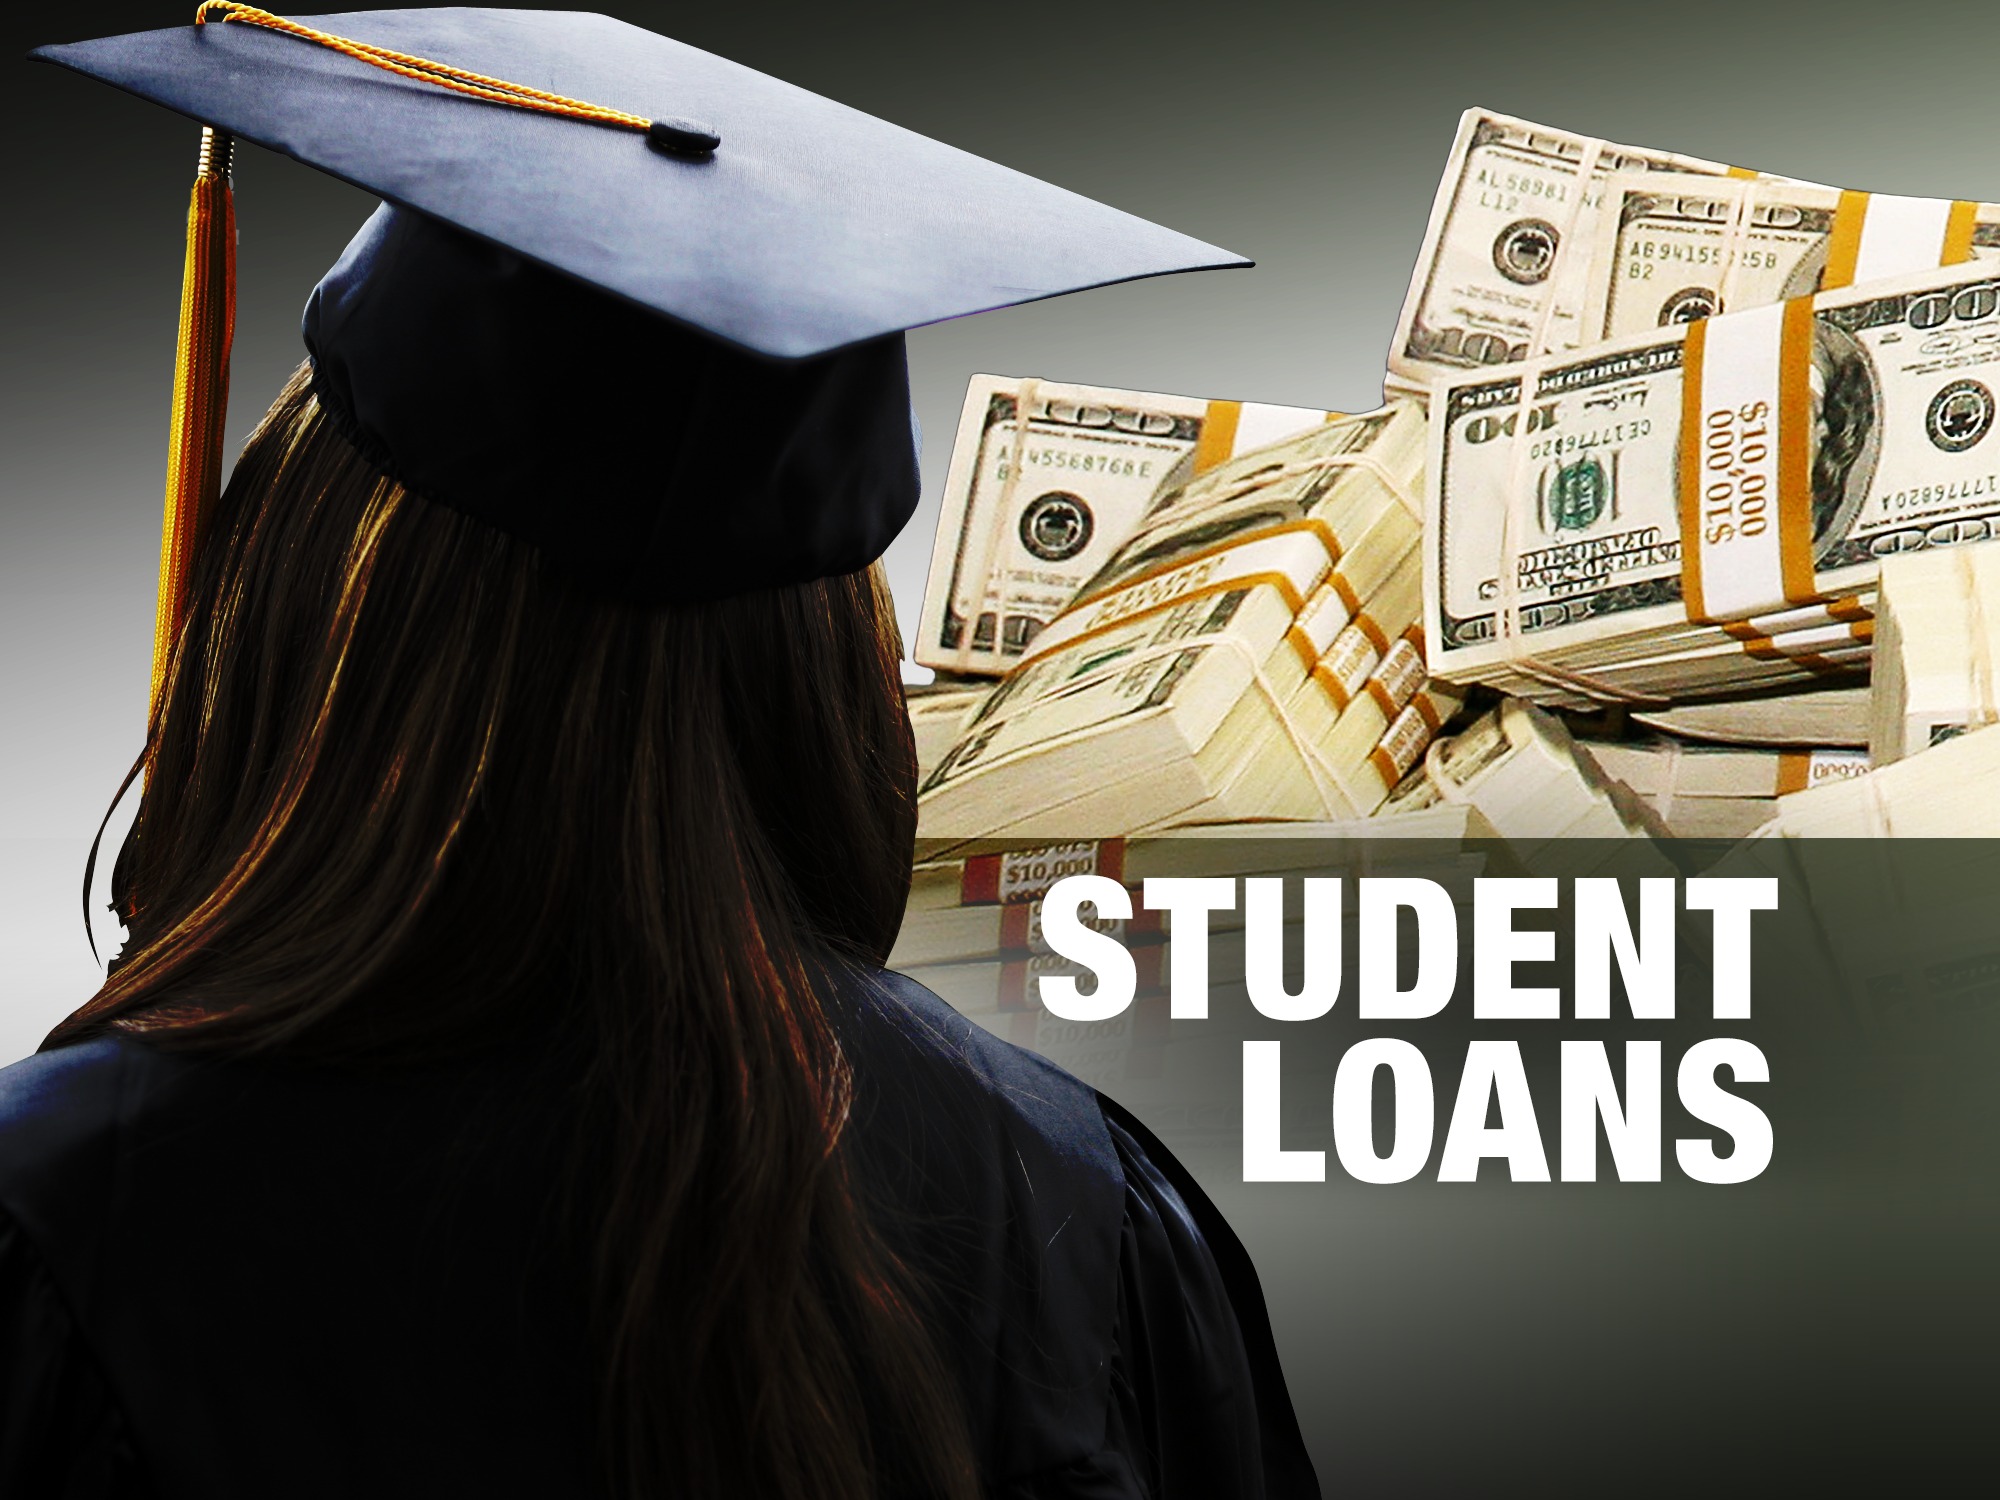 Resumption of Student-Loan Payments; Over 20% to Face $500 Monthly Bills, Study Warns (Photo: My Ads Feed)